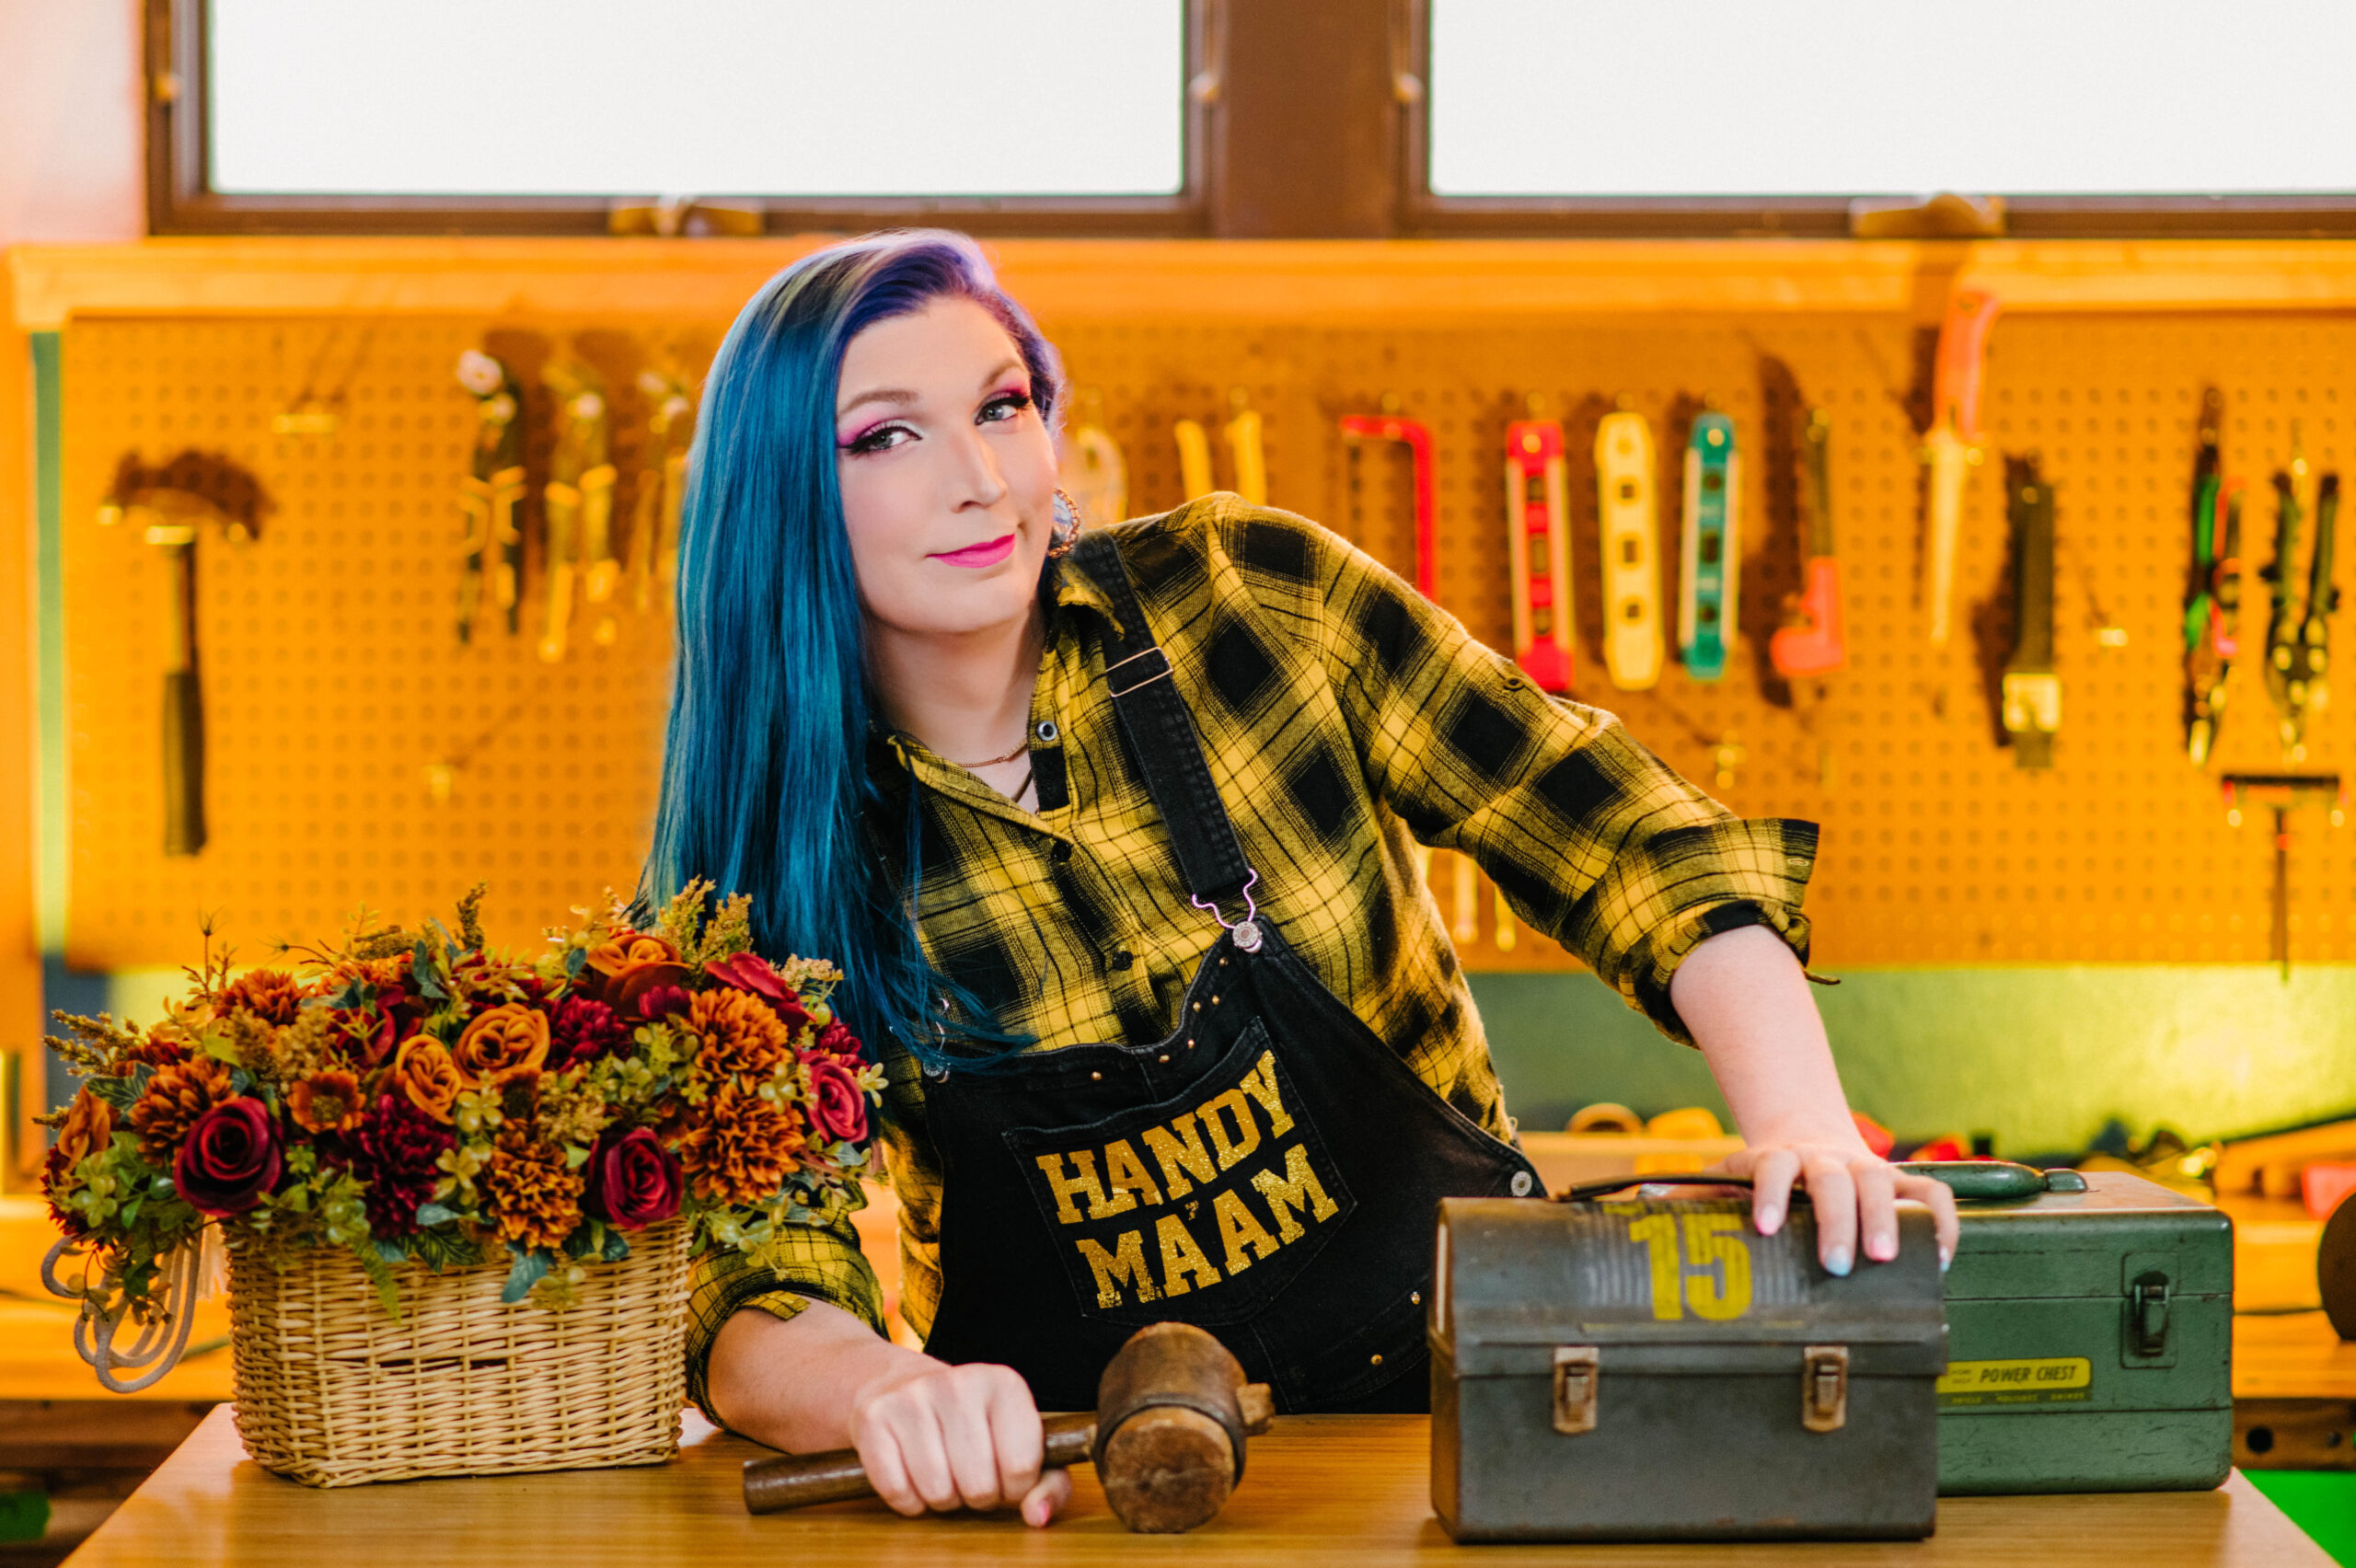 Mercury Stardust, a Trans woman with long blue and purple hair, wears overalls that say "Trans Handy Ma'am" in gold glitter lettering. She leans on her elbow with her hand resting on an old-fashioned toolbox and poses smiling at the camera.